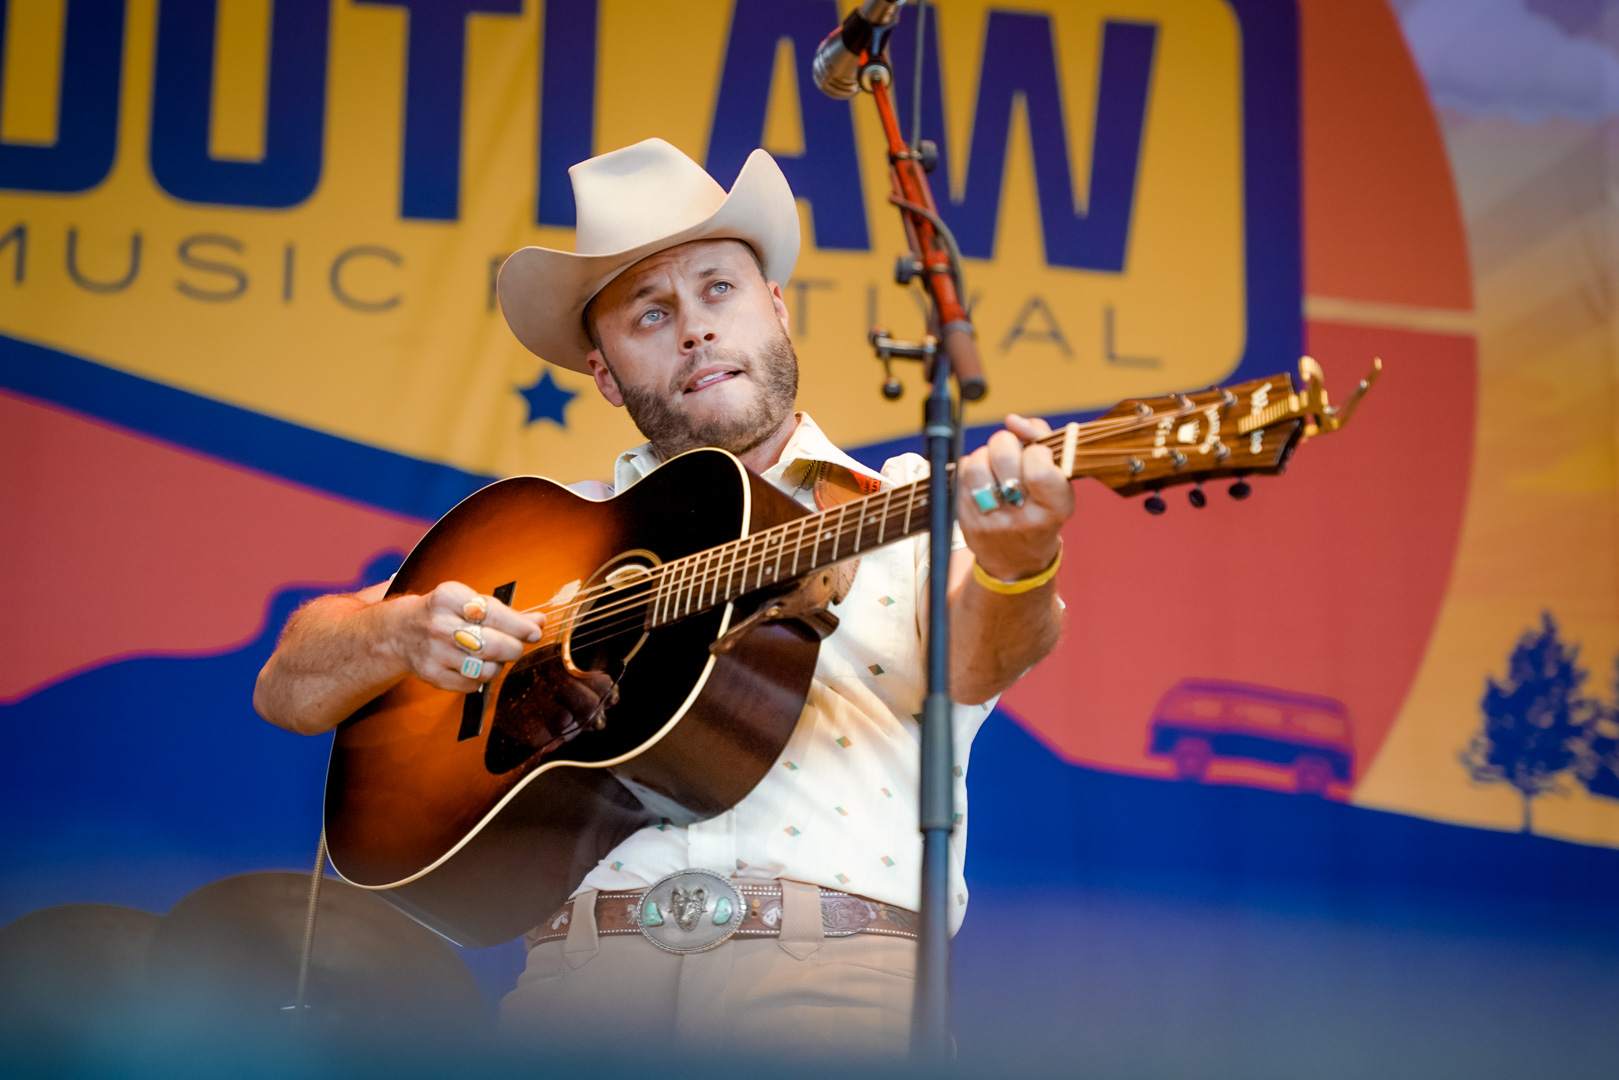 A handsome man in a cowboy hat plays guitar